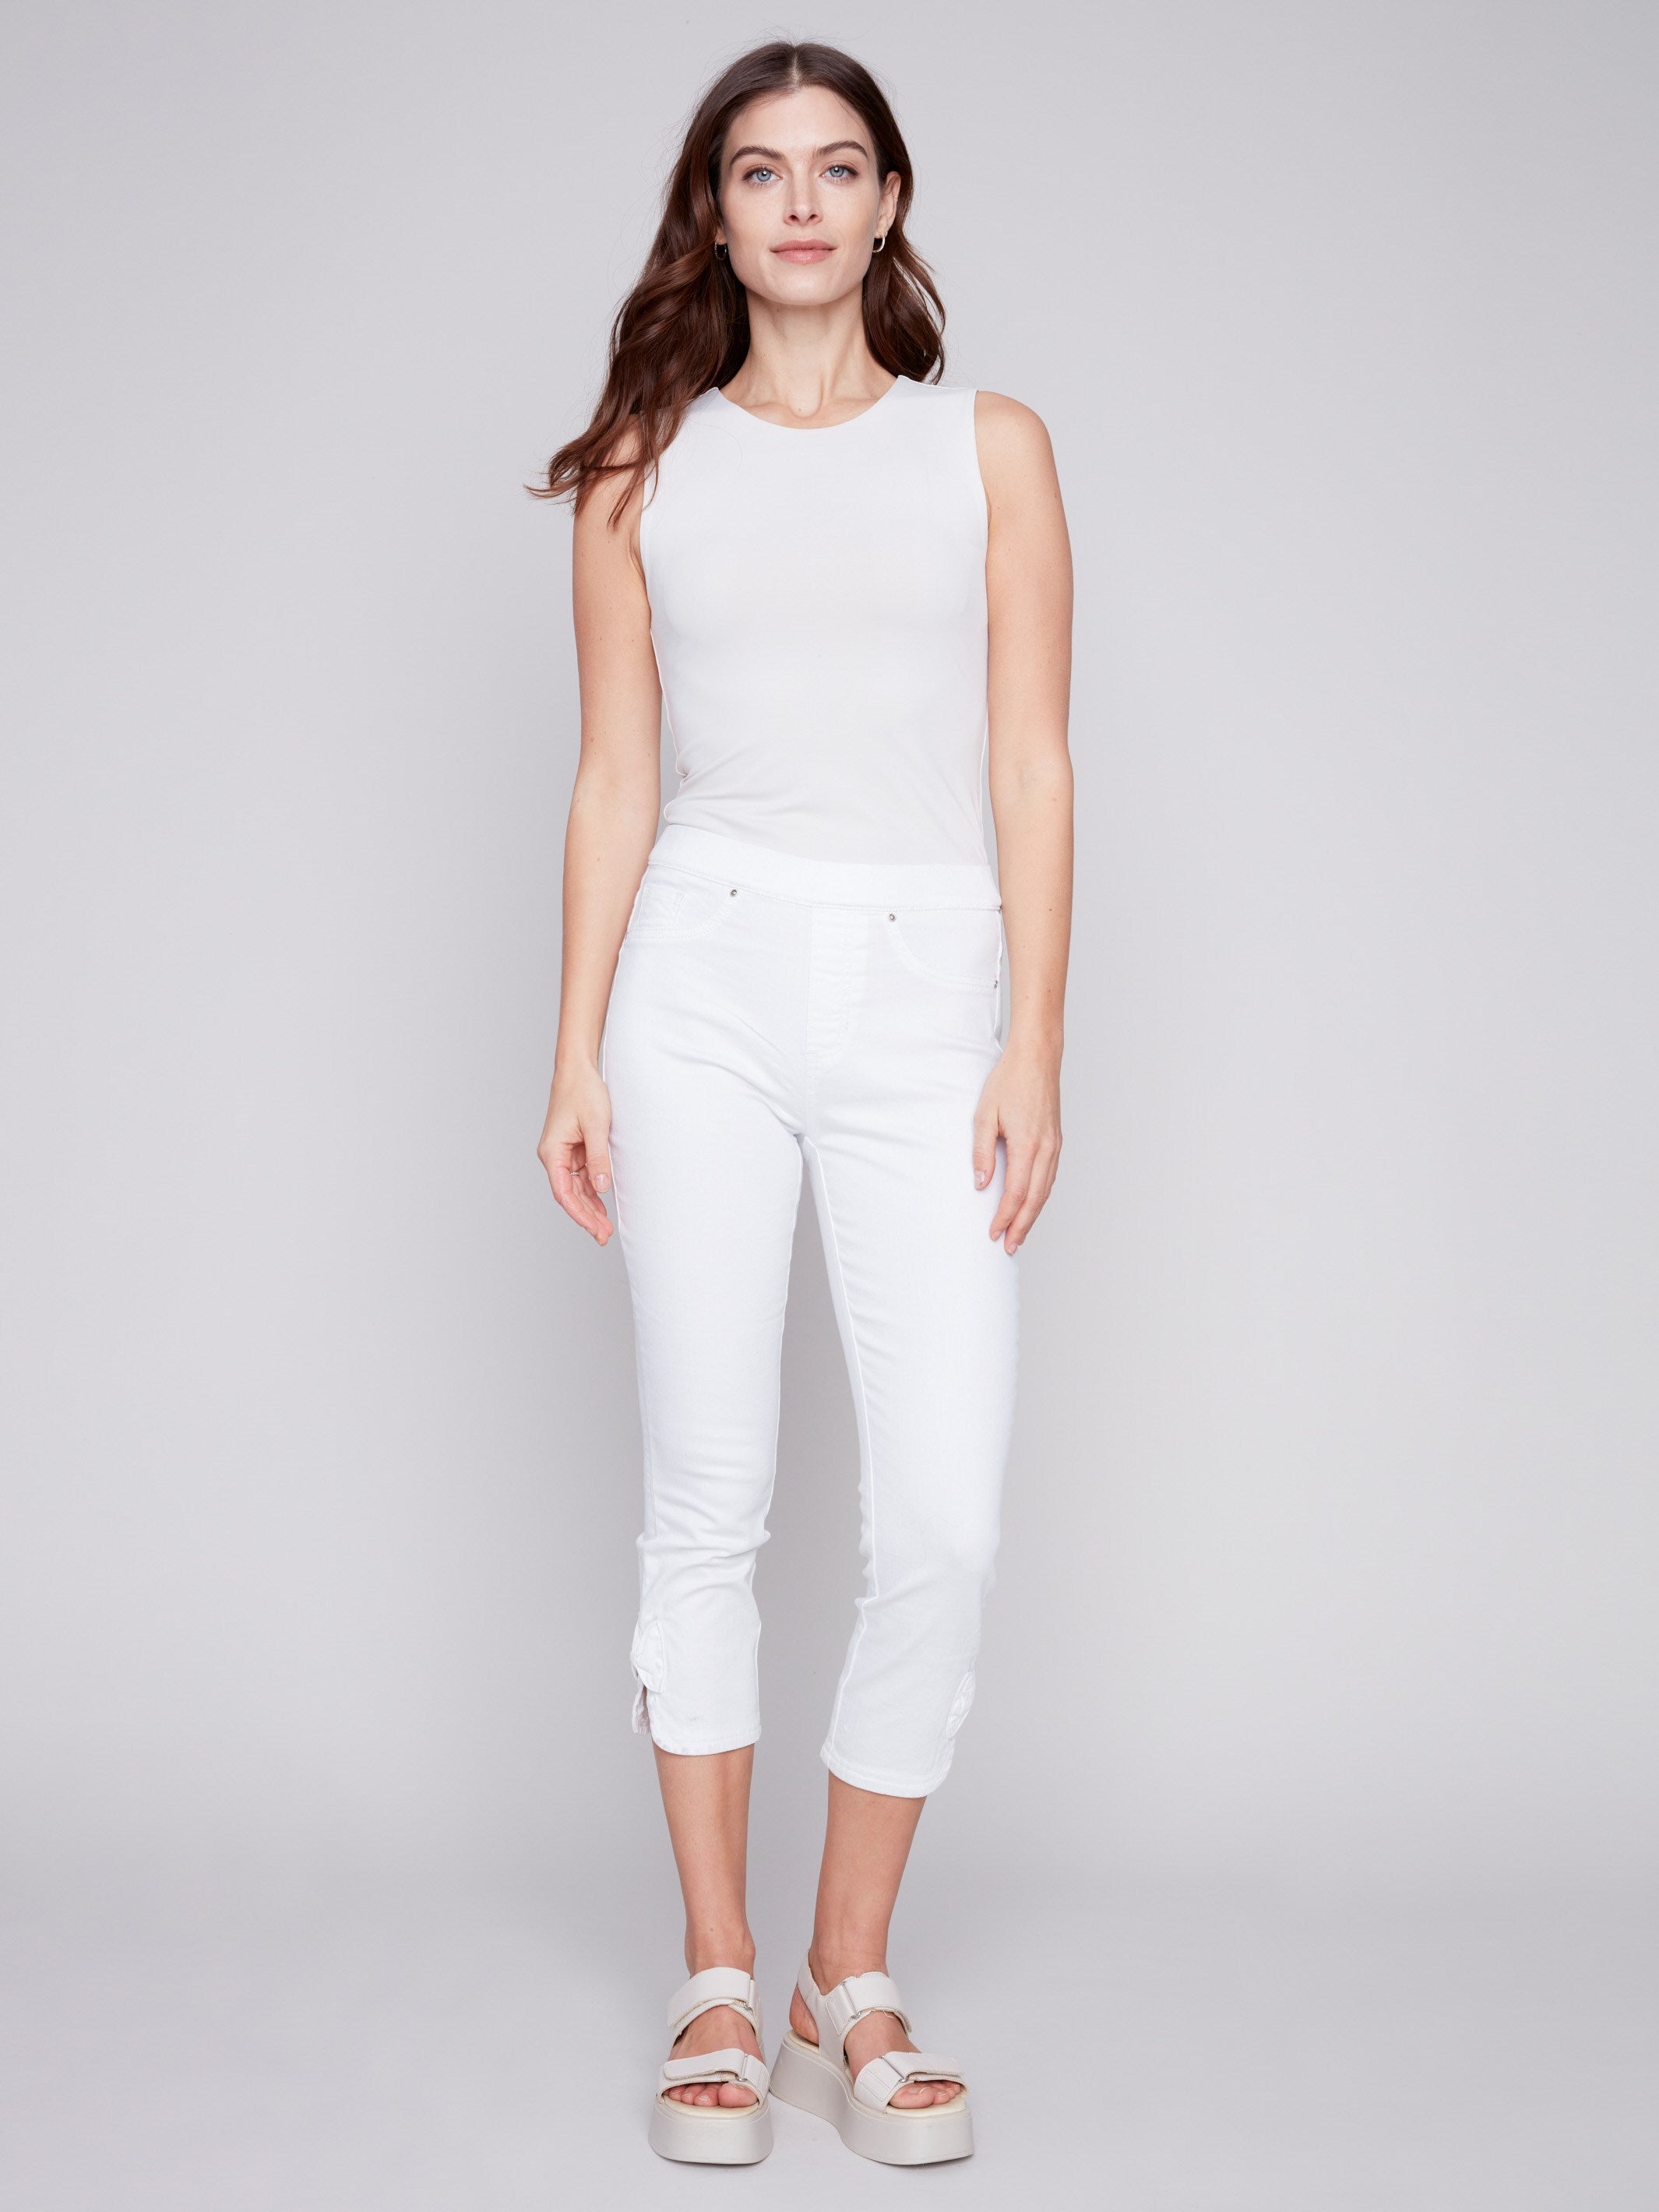 Pull-On Jeans with Bow Detail - White - Charlie B Collection Canada - Image 4